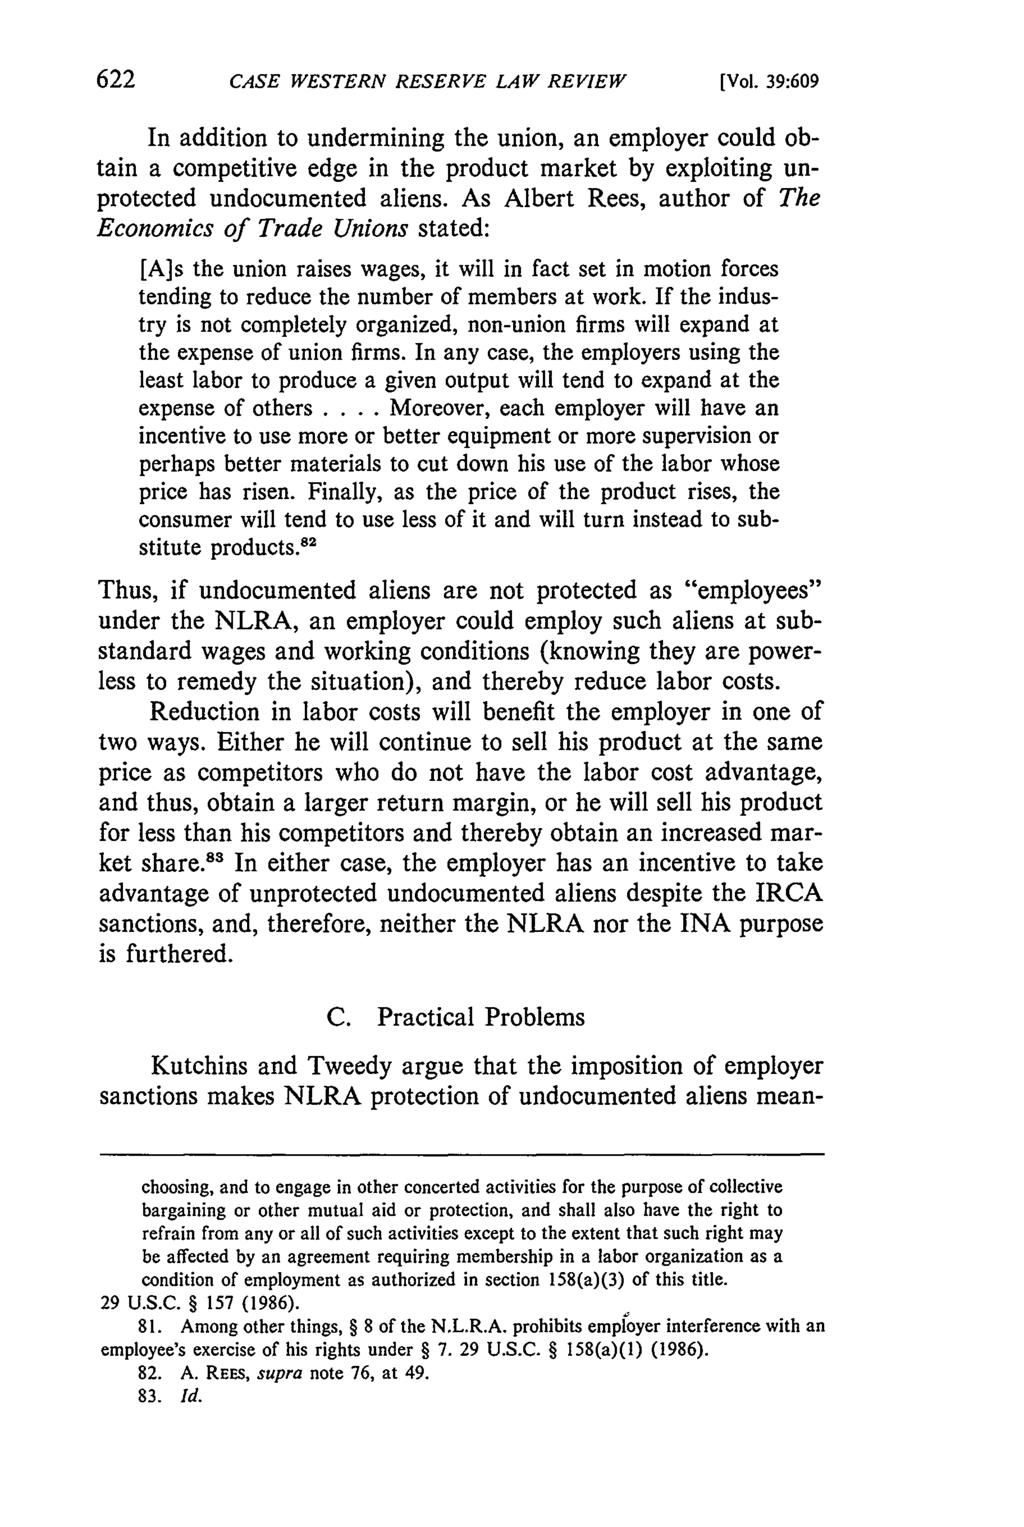 CASE WESTERN RESERVE LAW REVIEW [Vol. 39:609 In addition to undermining the union, an employer could obtain a competitive edge in the product market by exploiting unprotected undocumented aliens.